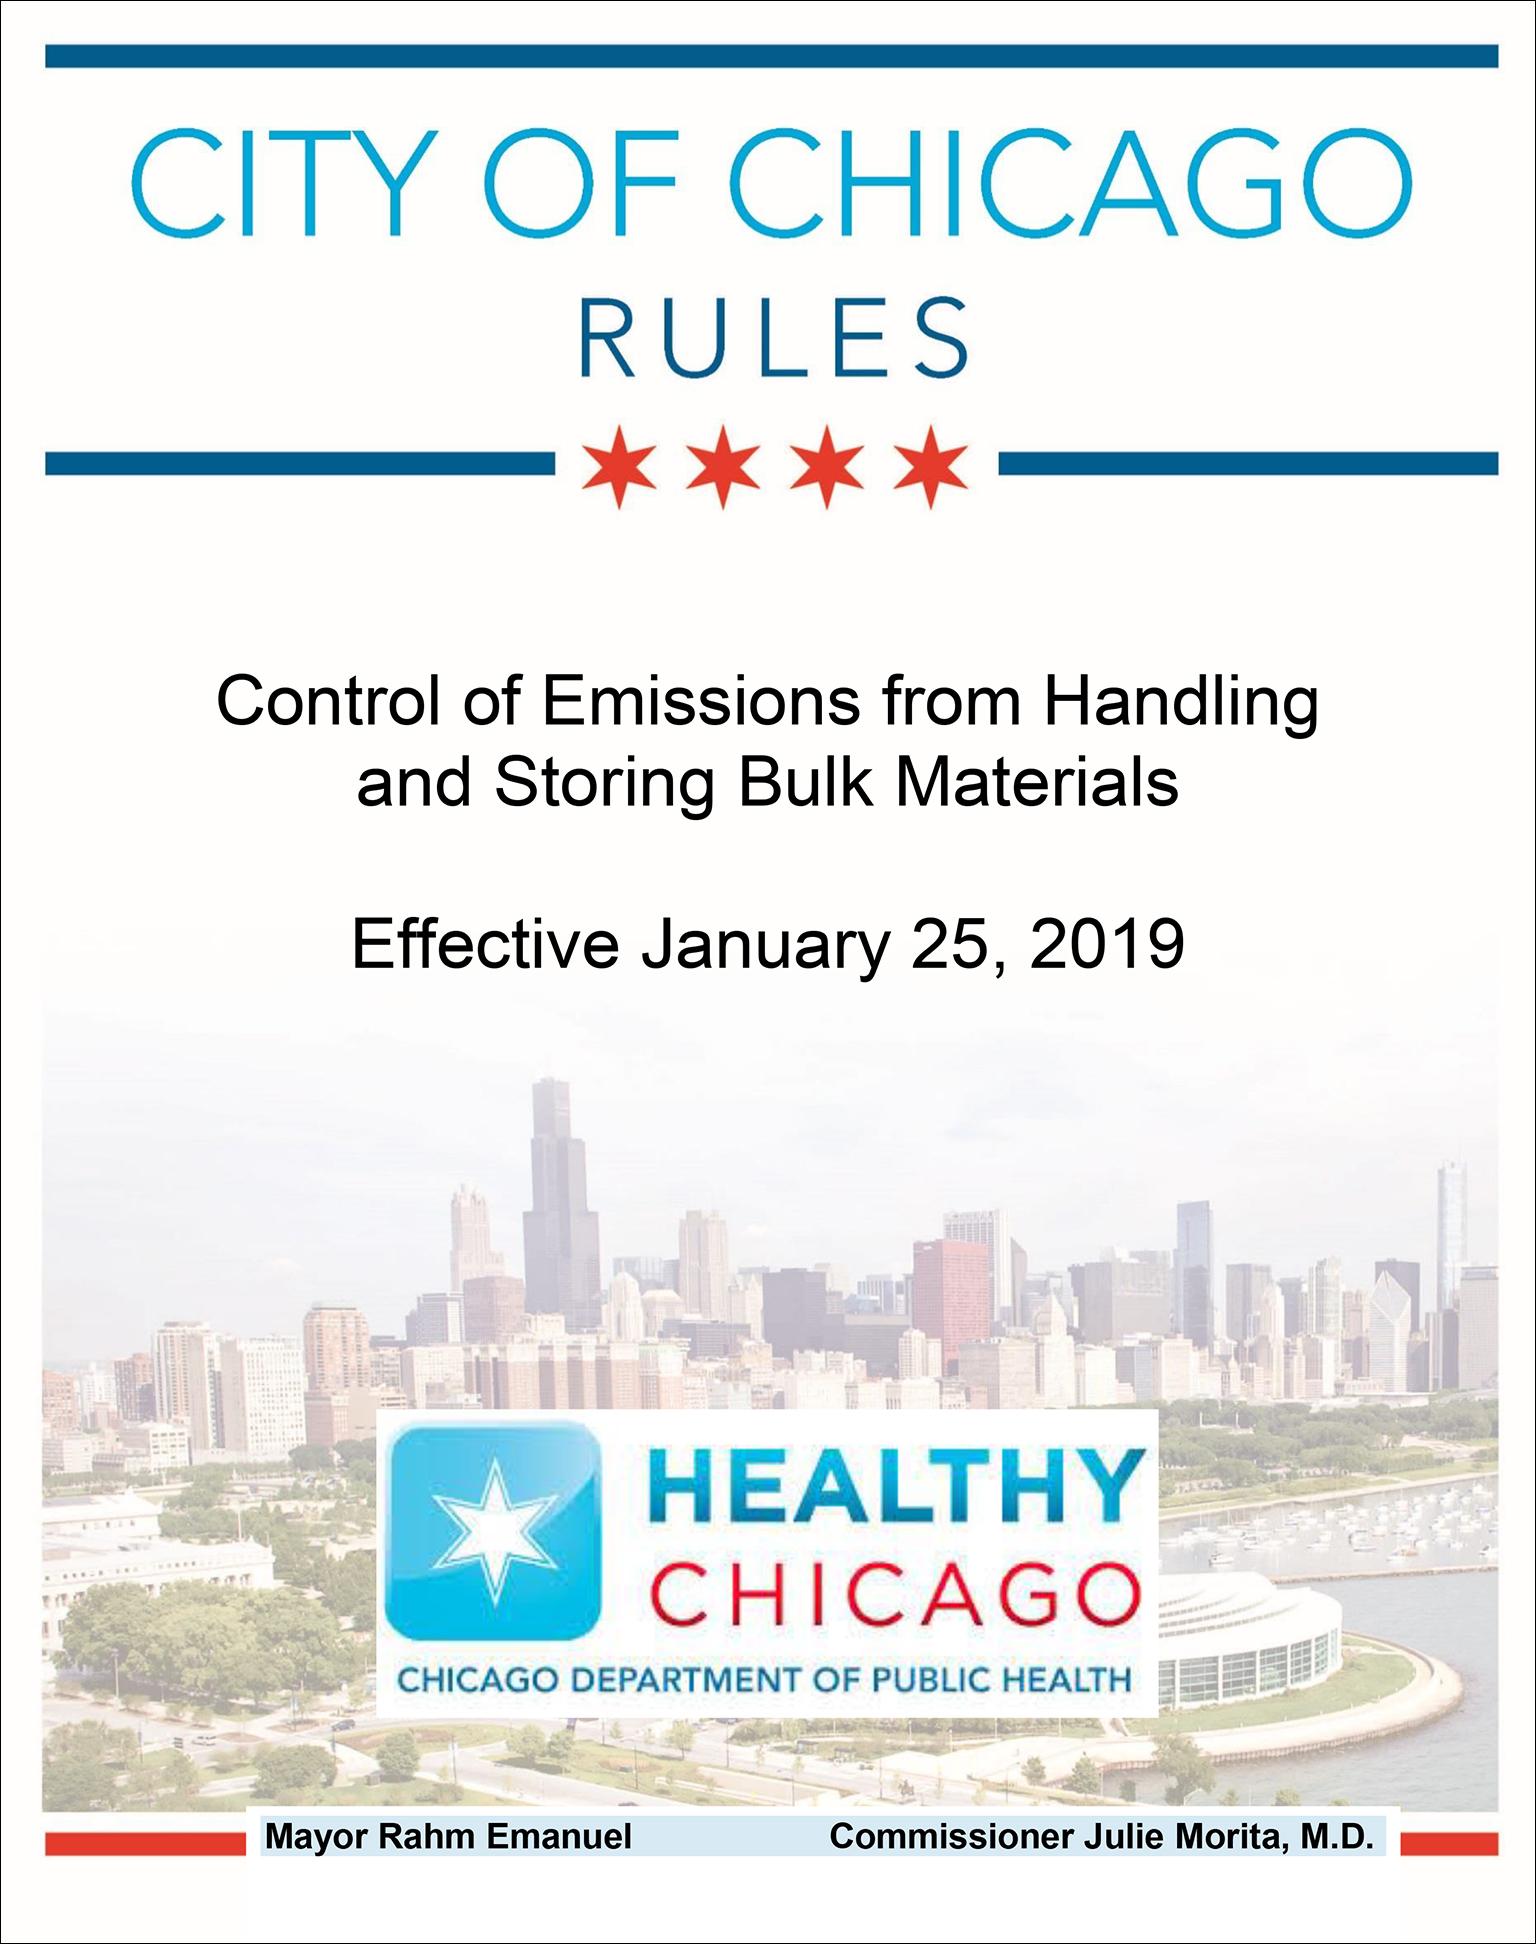 Document: Rules for controlling emissions from handling and storing bulk materials (Chicago Department of Public Health)